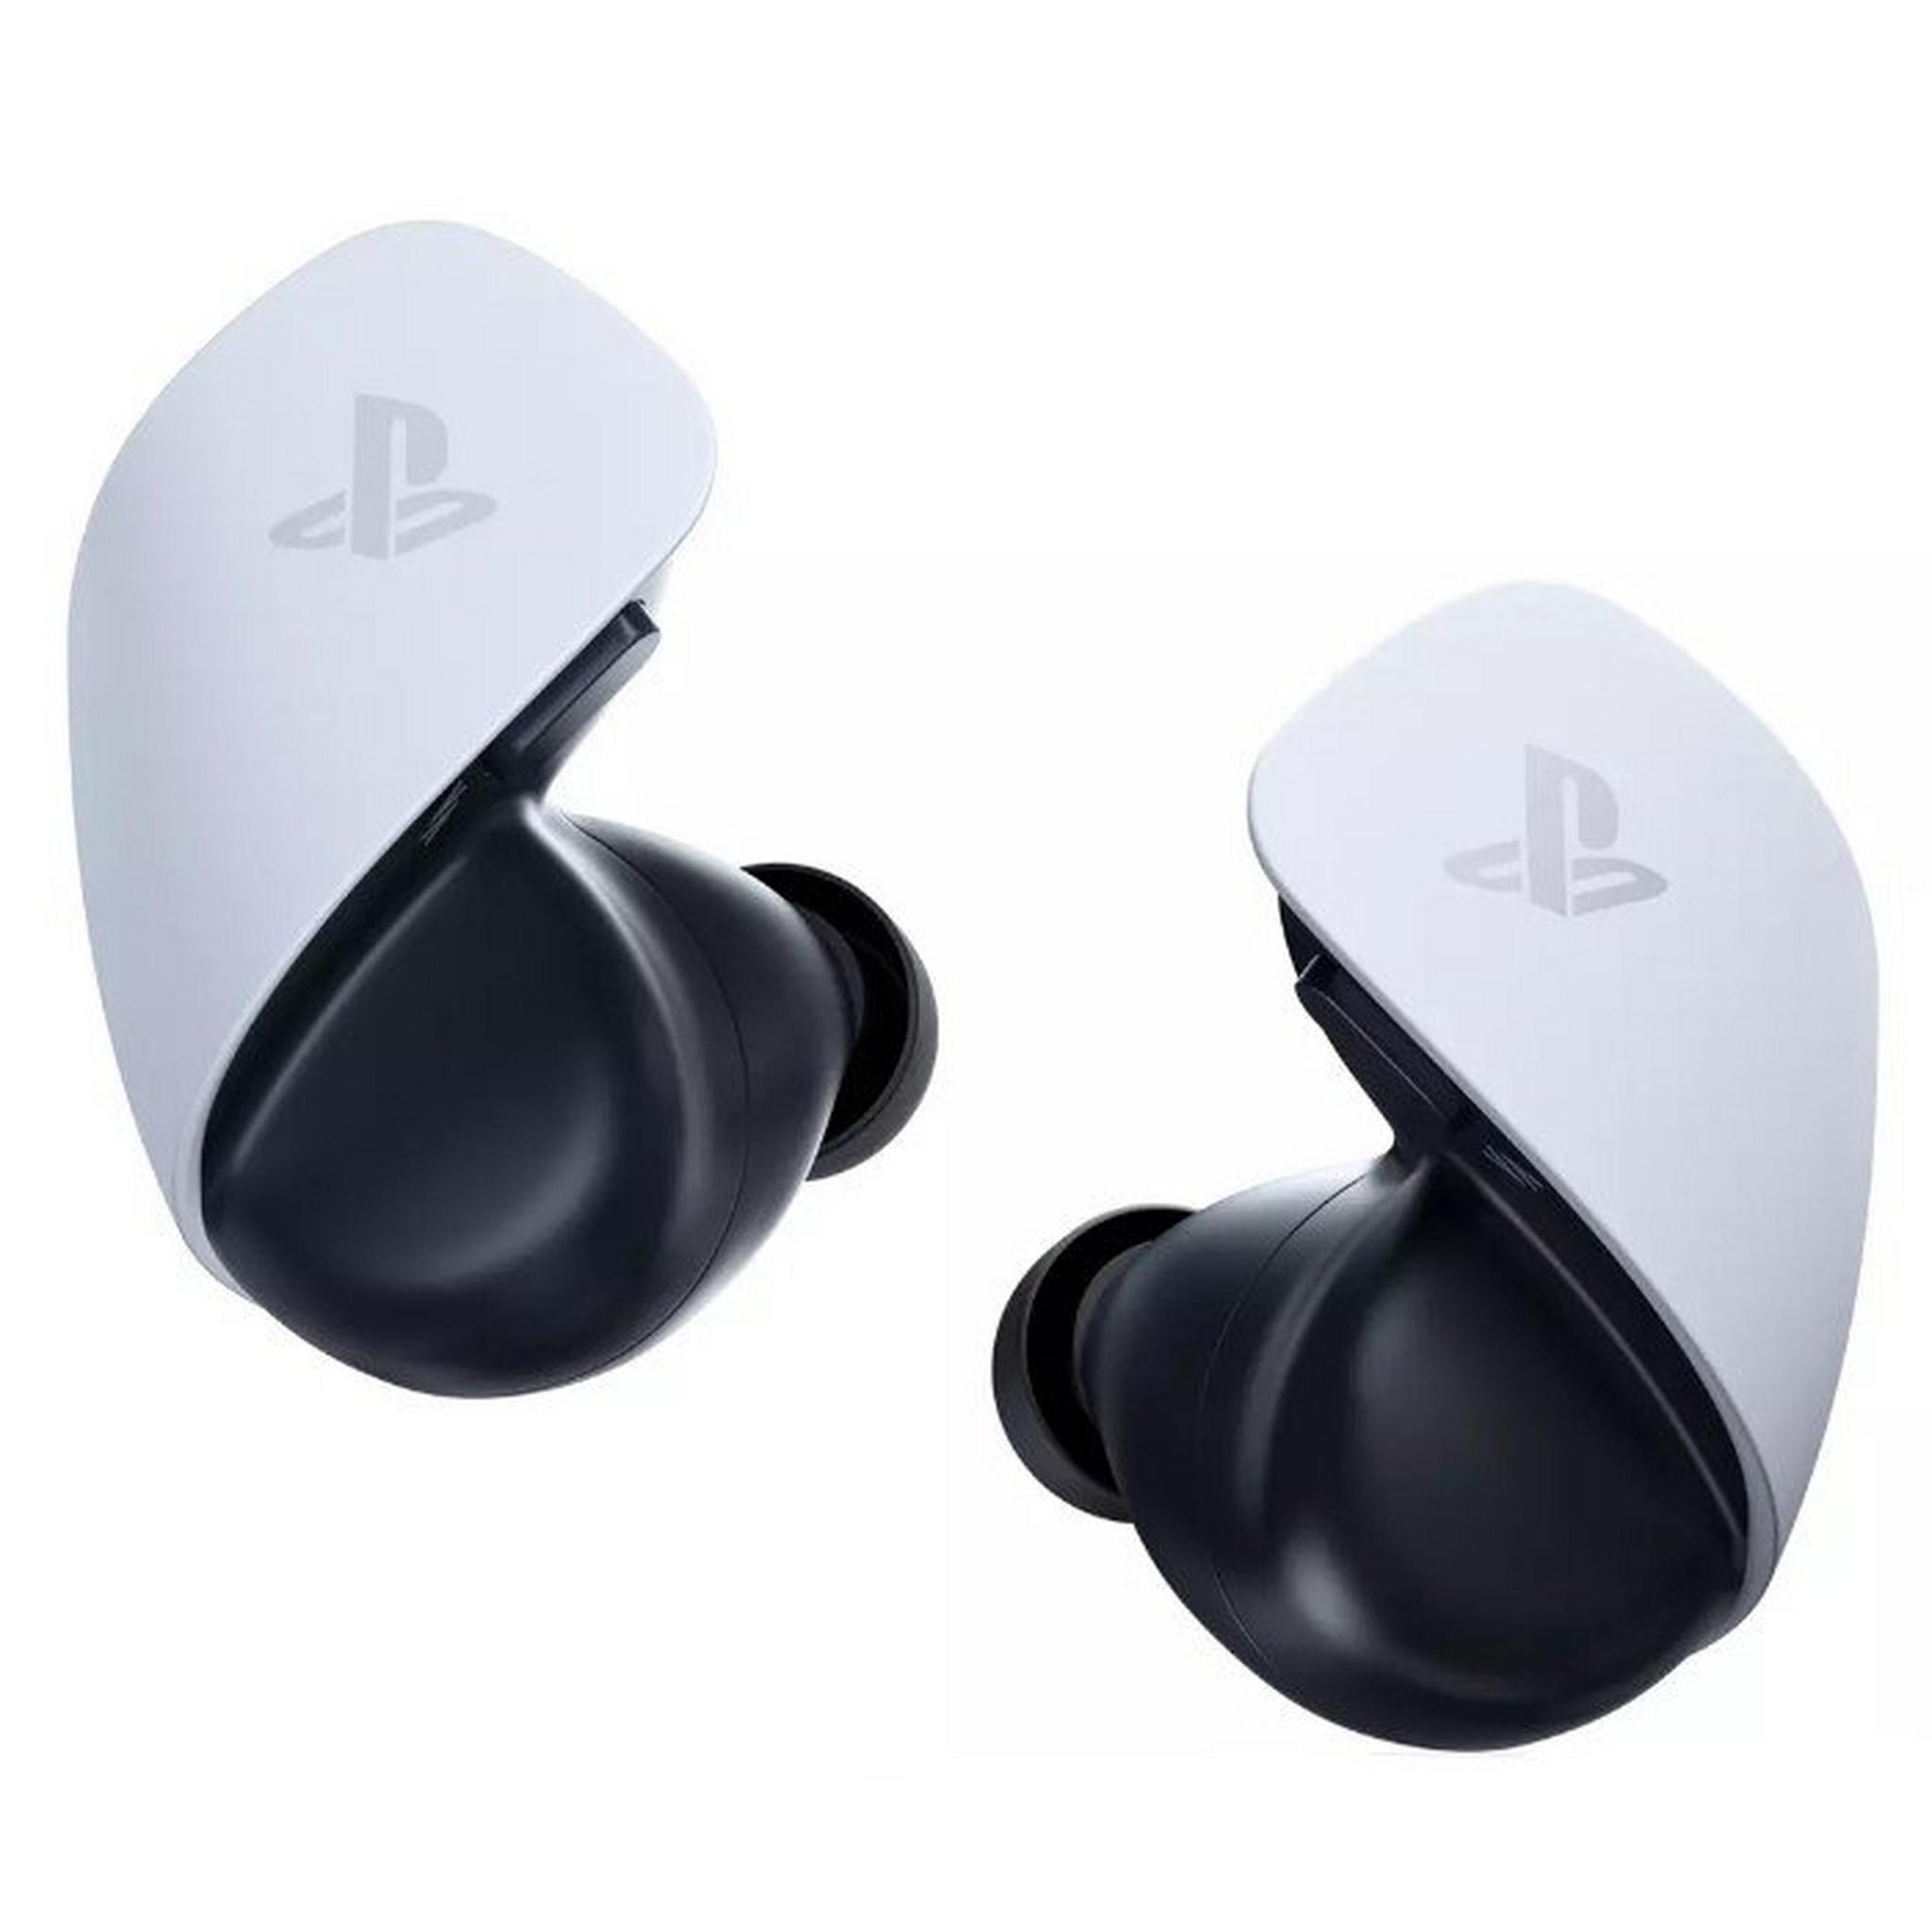 Sony Playstation 5 Pulse Explore Wireless Earbuds – Black/White